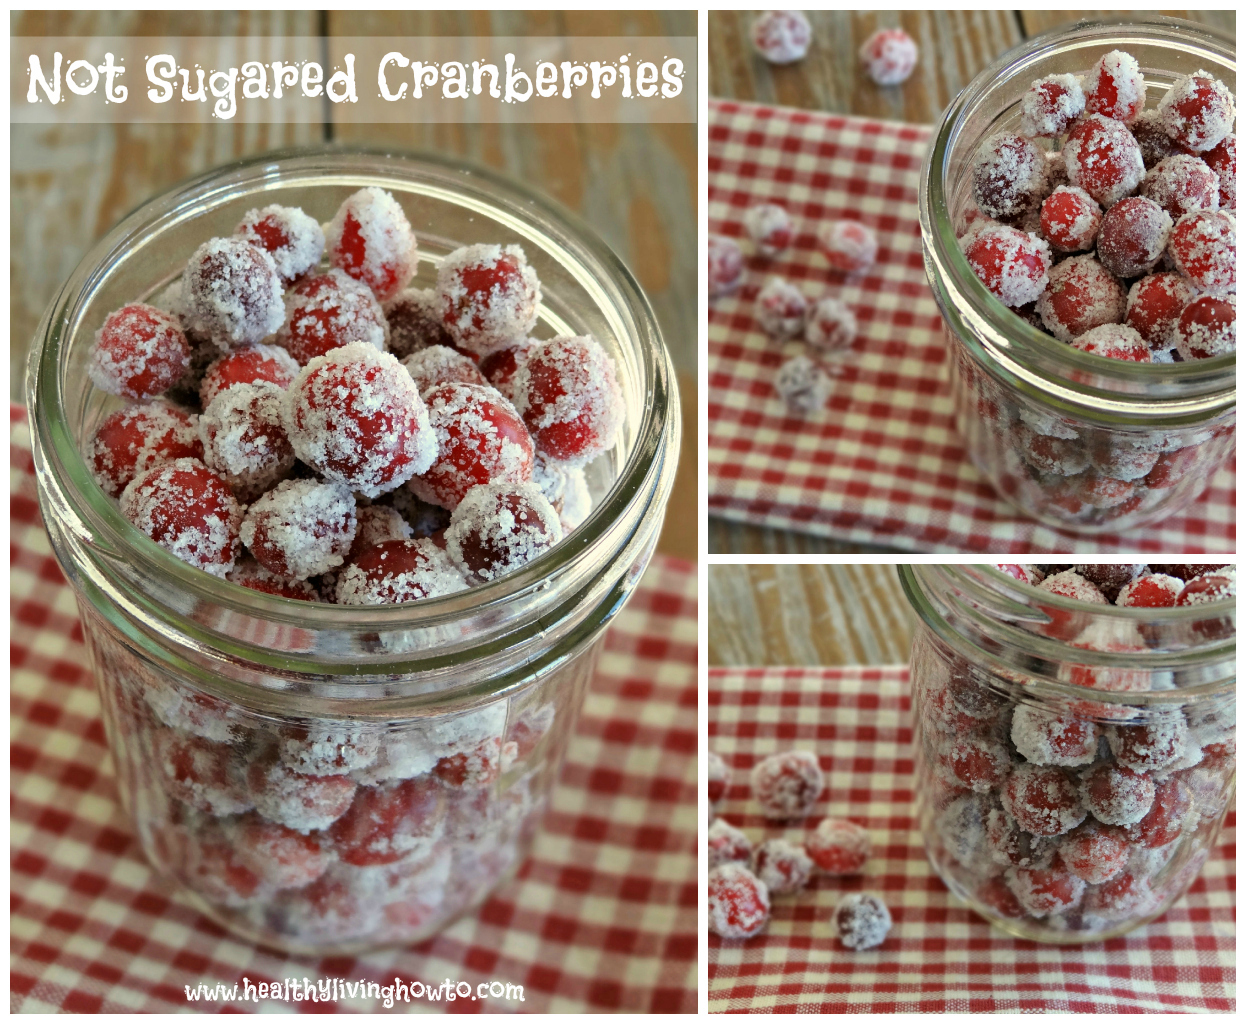 Not Sugared Cranberries Healthy Living How To